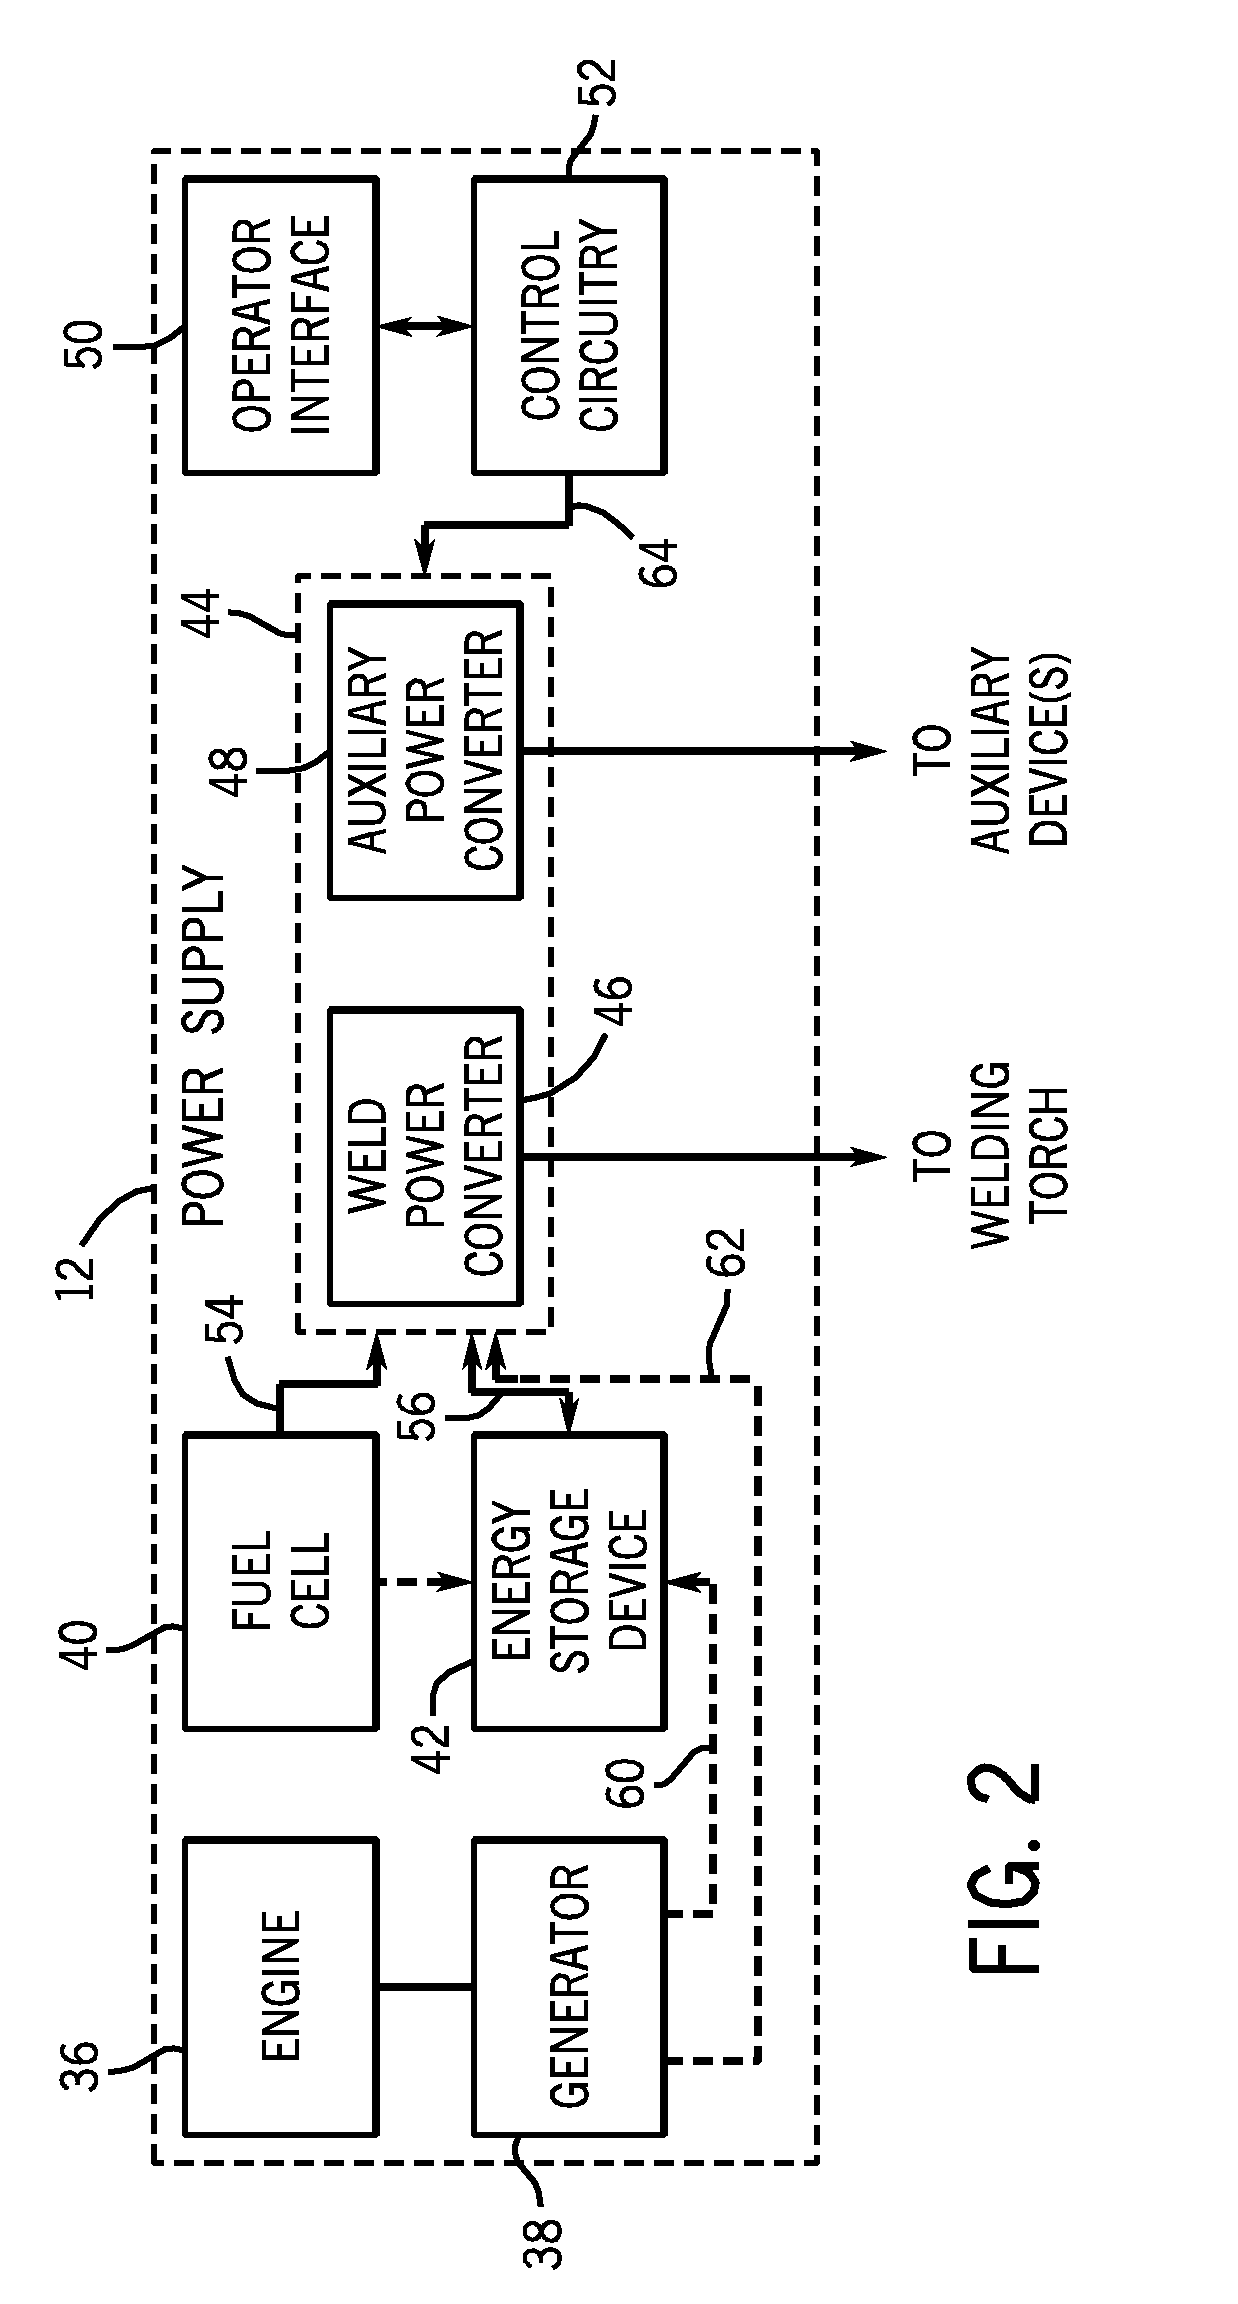 Hybrid welding systems and devices